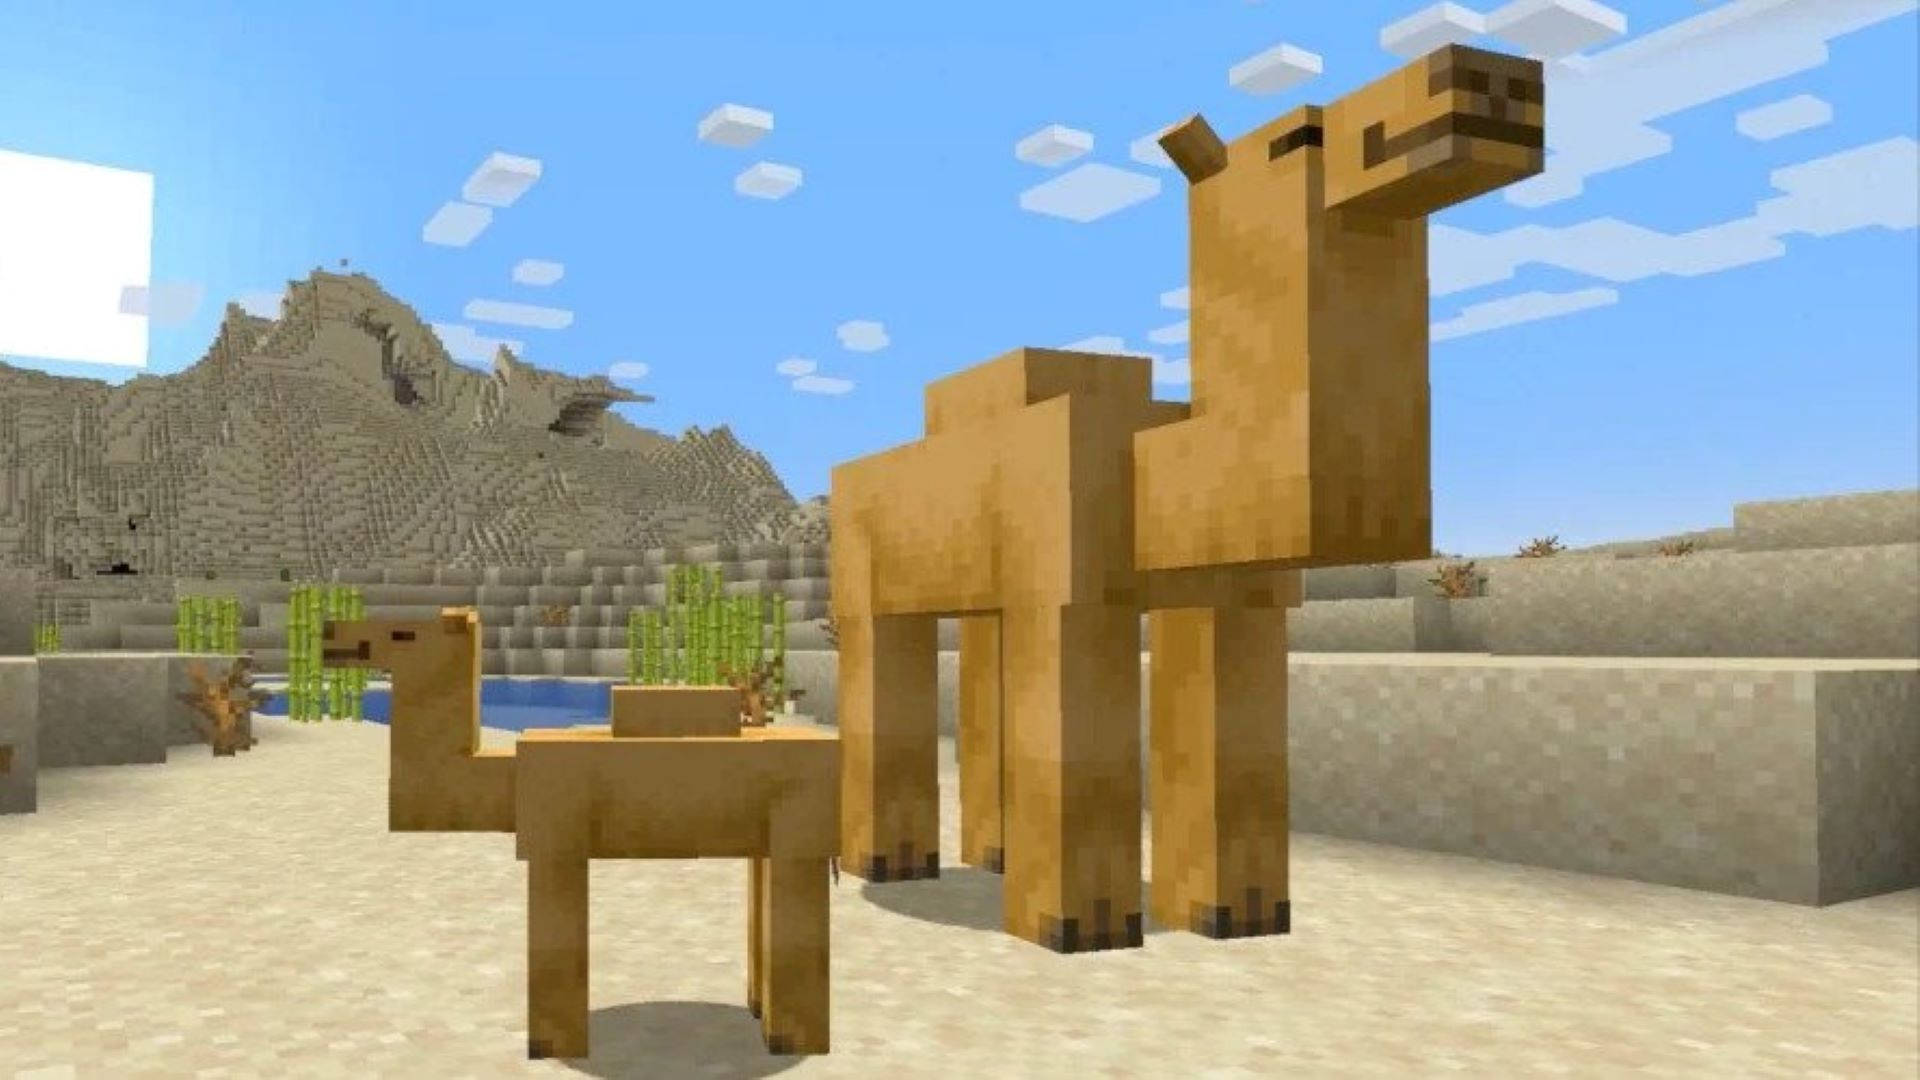 Camels In The Desert Minecraft Hd Background